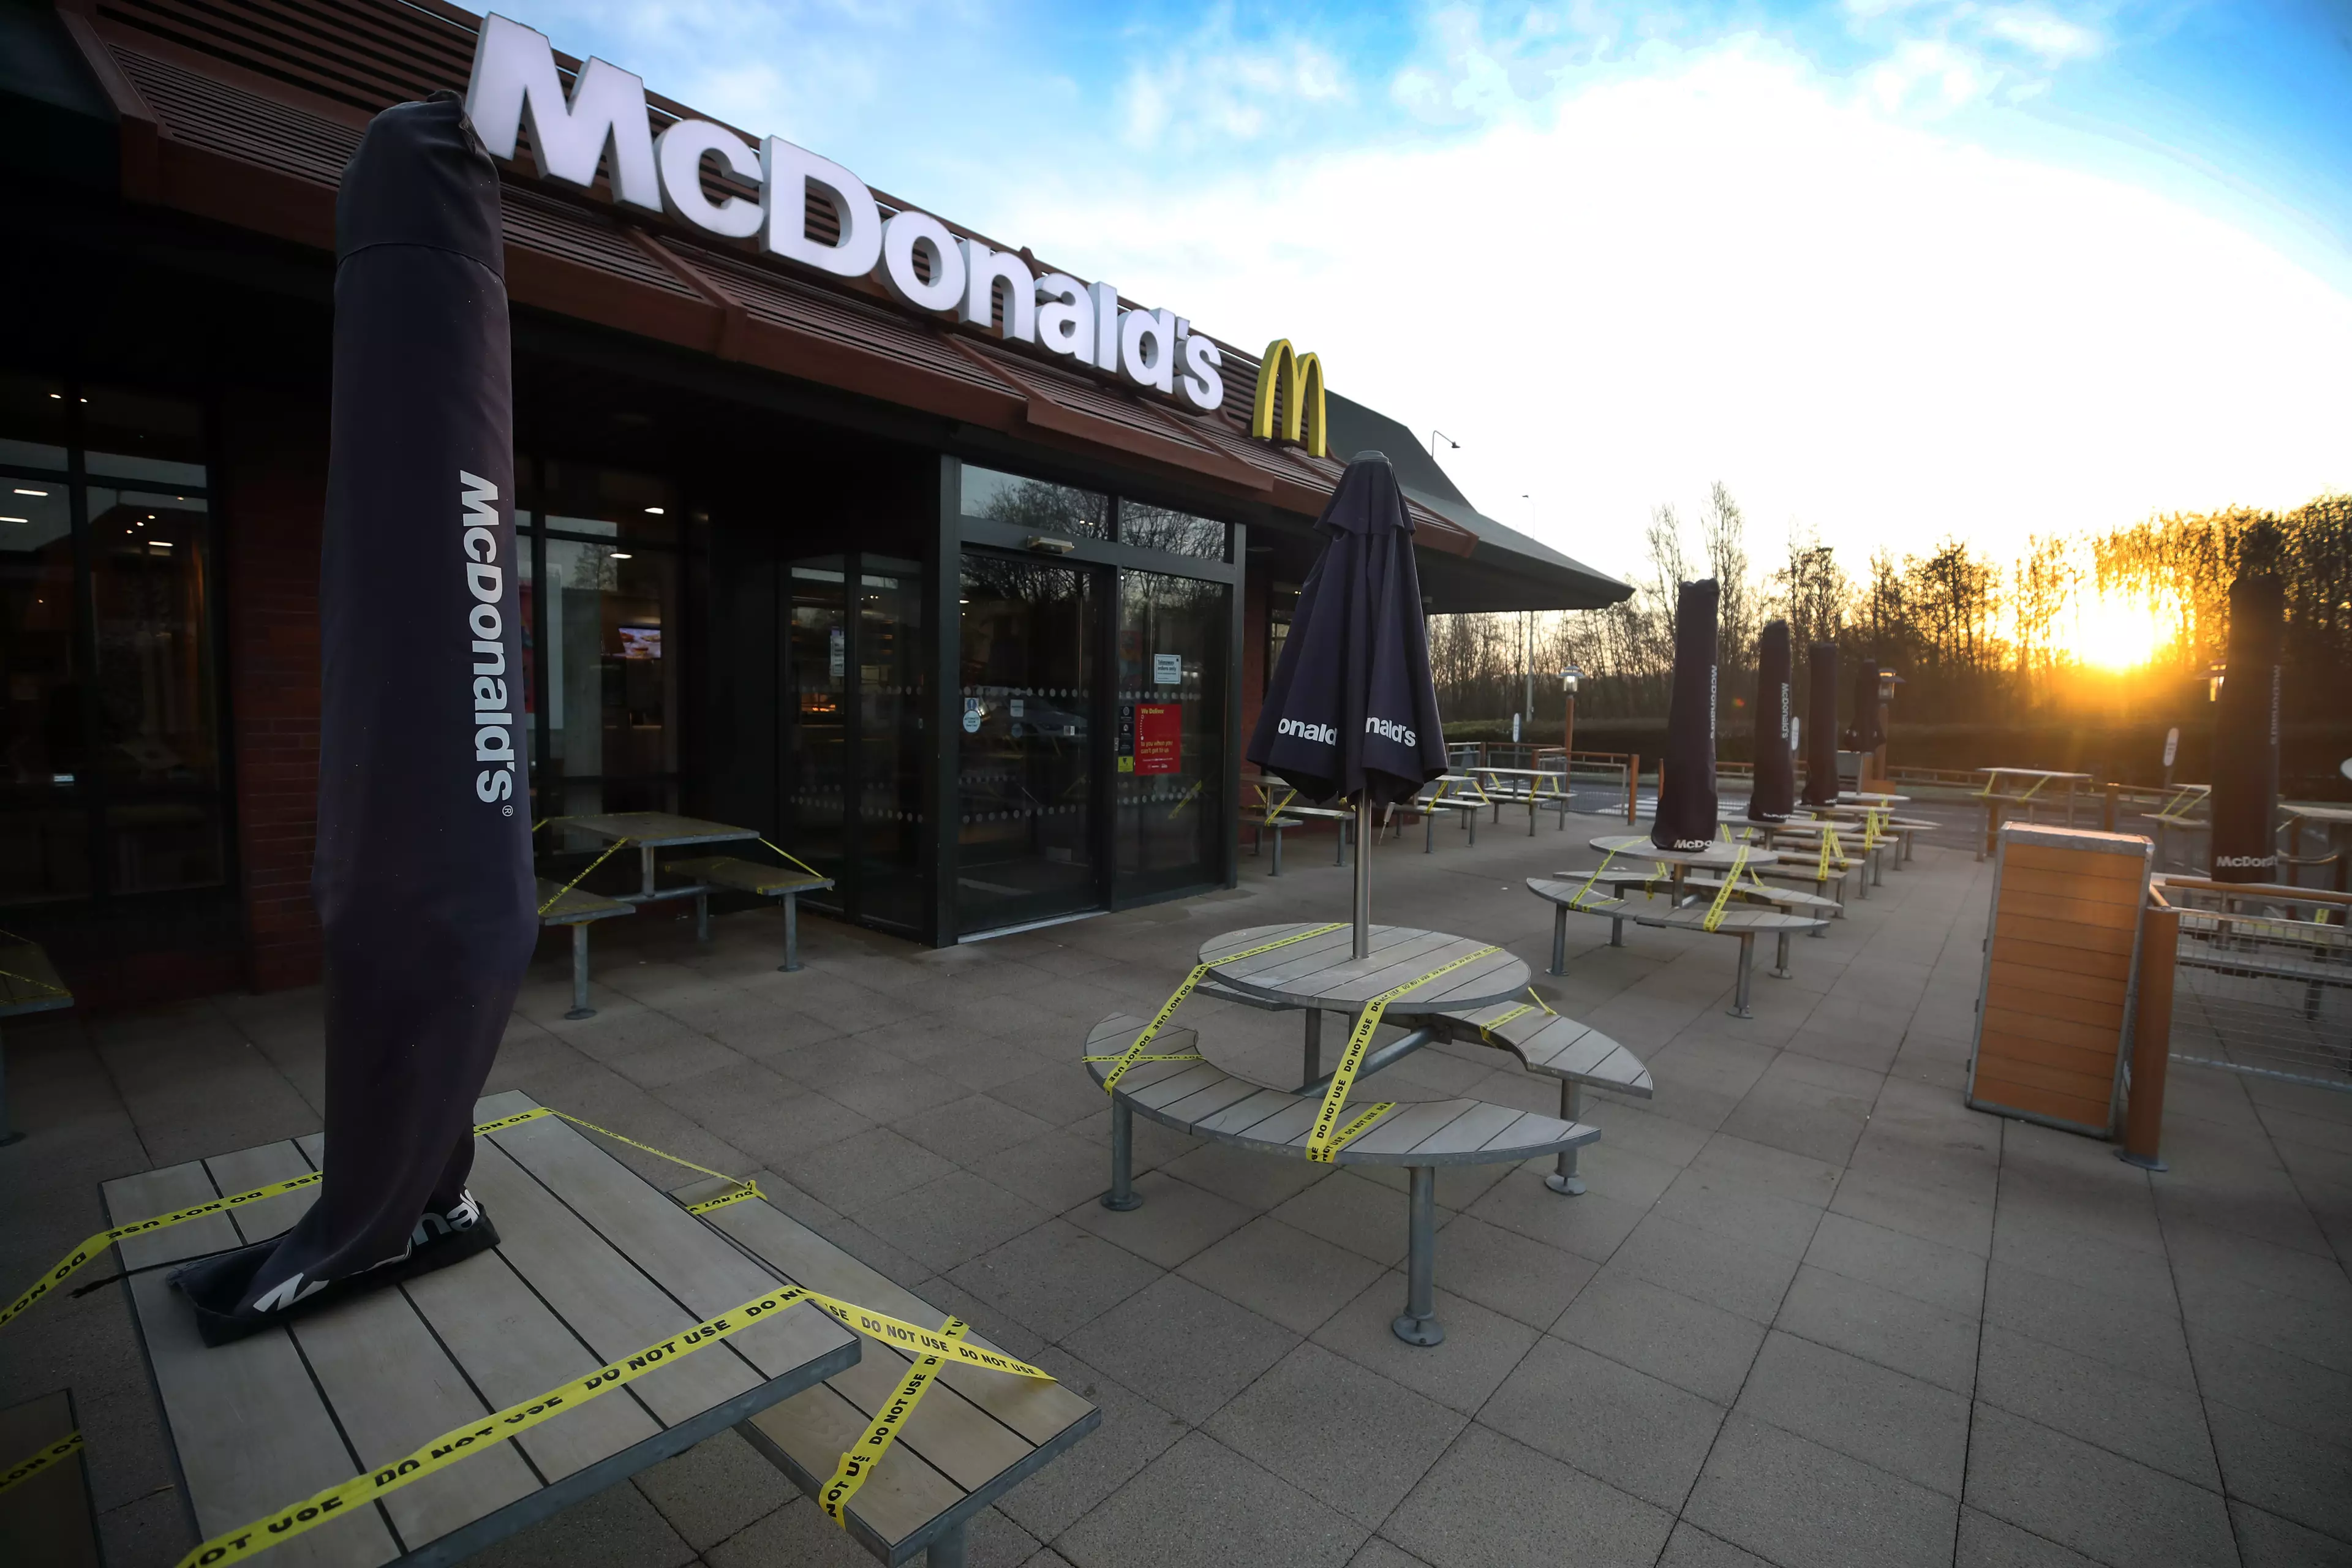 A McDonald's restaurant that is currently closed amid the coronavirus pandemic.